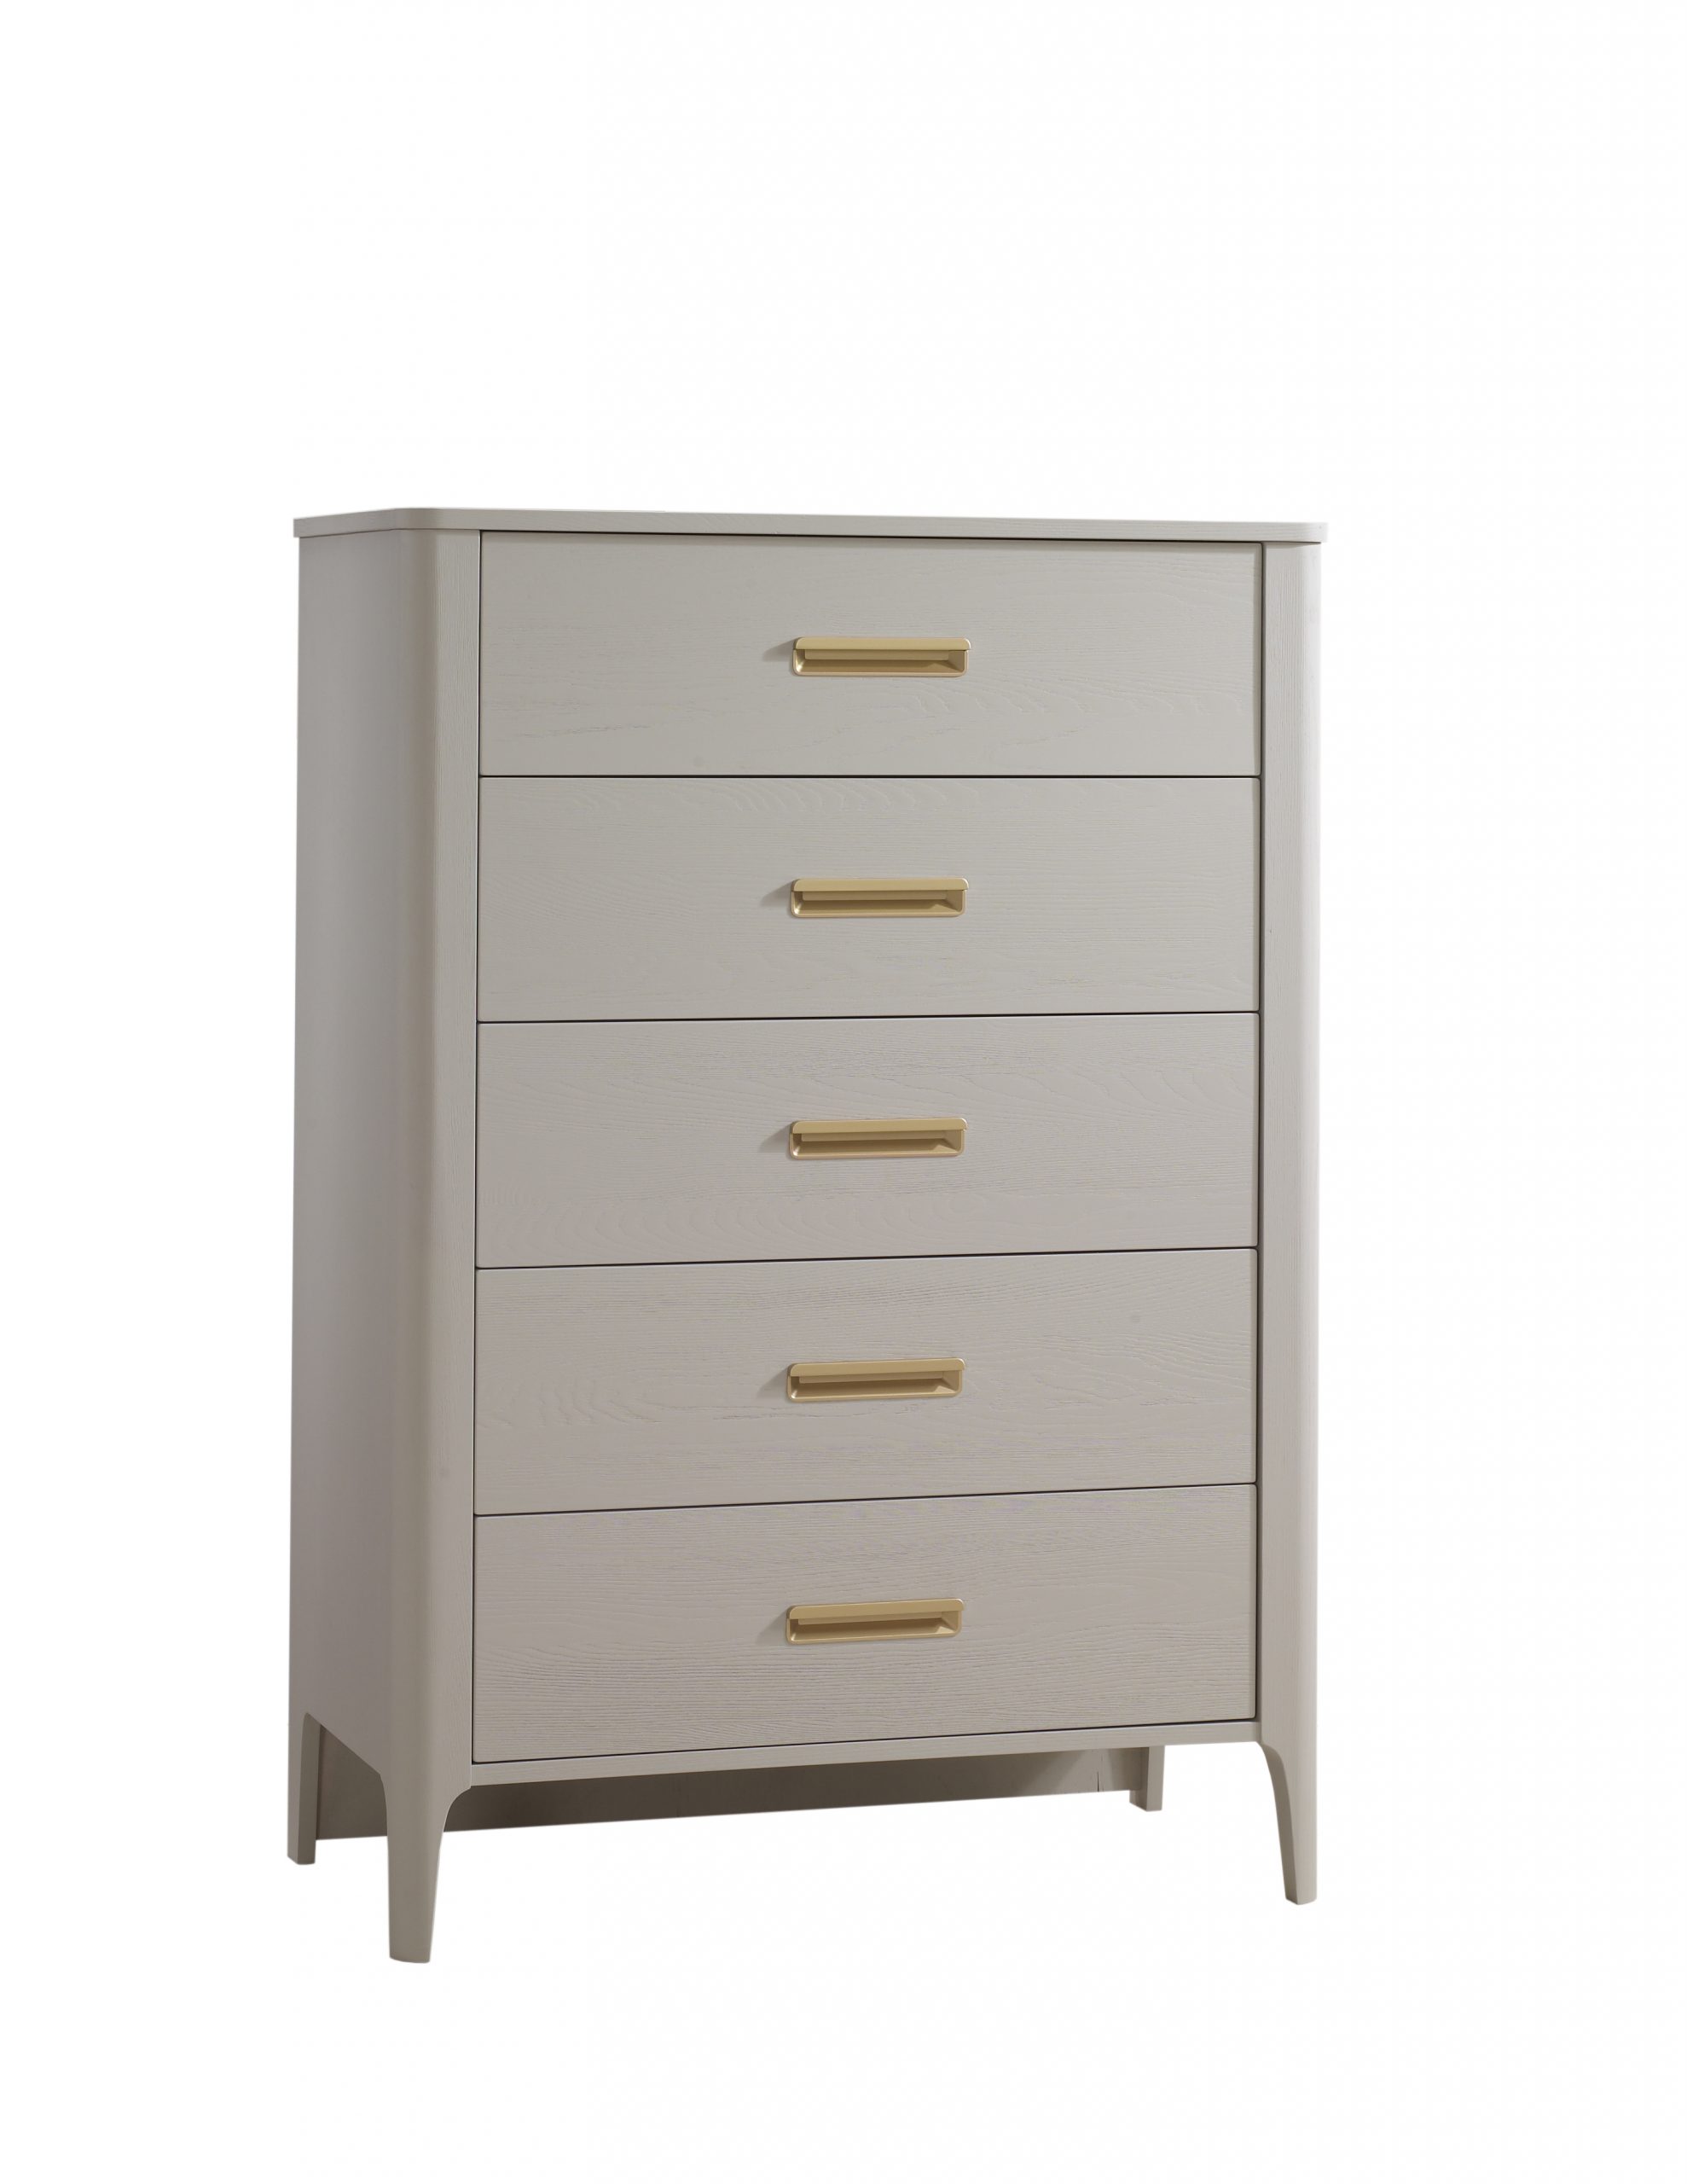 Palo 5 Drawer Tall Chest in Dove